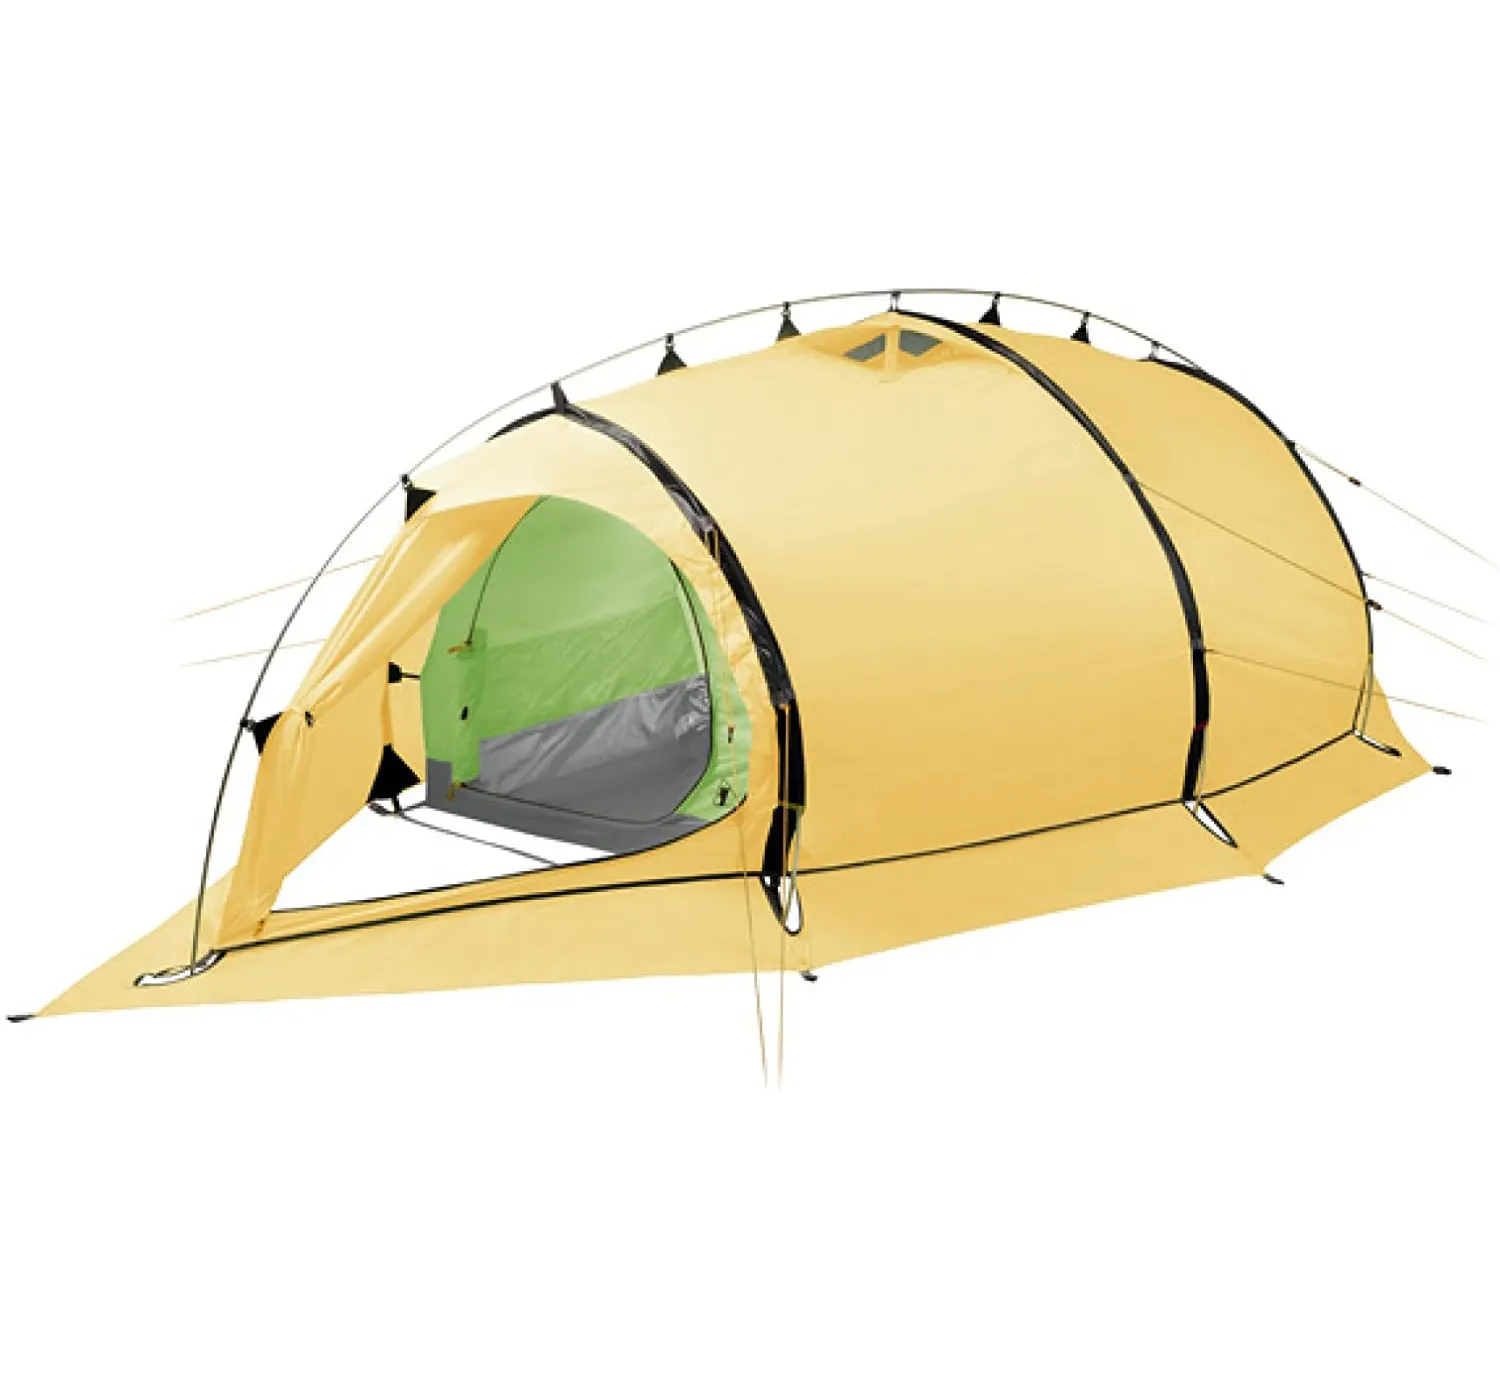 Tunnel Type Tent for 2 Person Windwall 2 Mountaineering & Mountain Tourism Camping Tent Outdoor